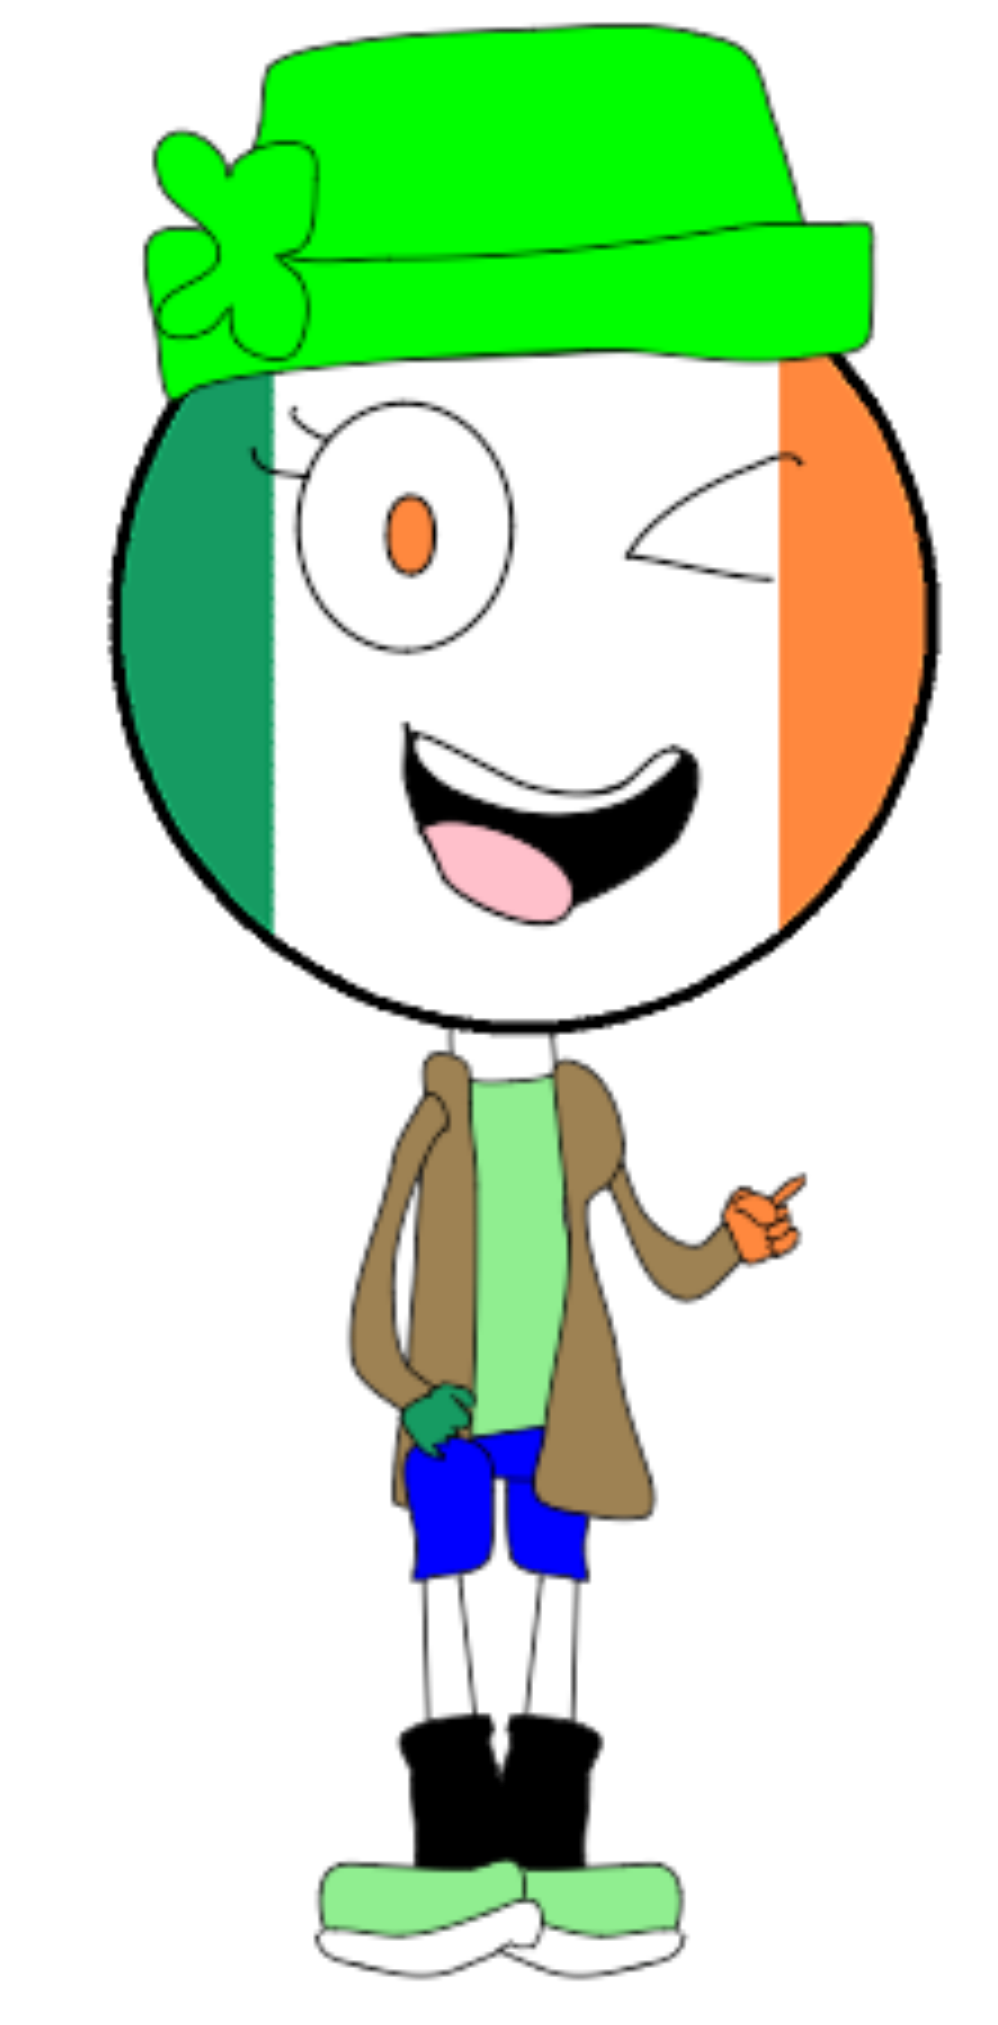 Category:CountryHumans, Fictional Characters Wiki